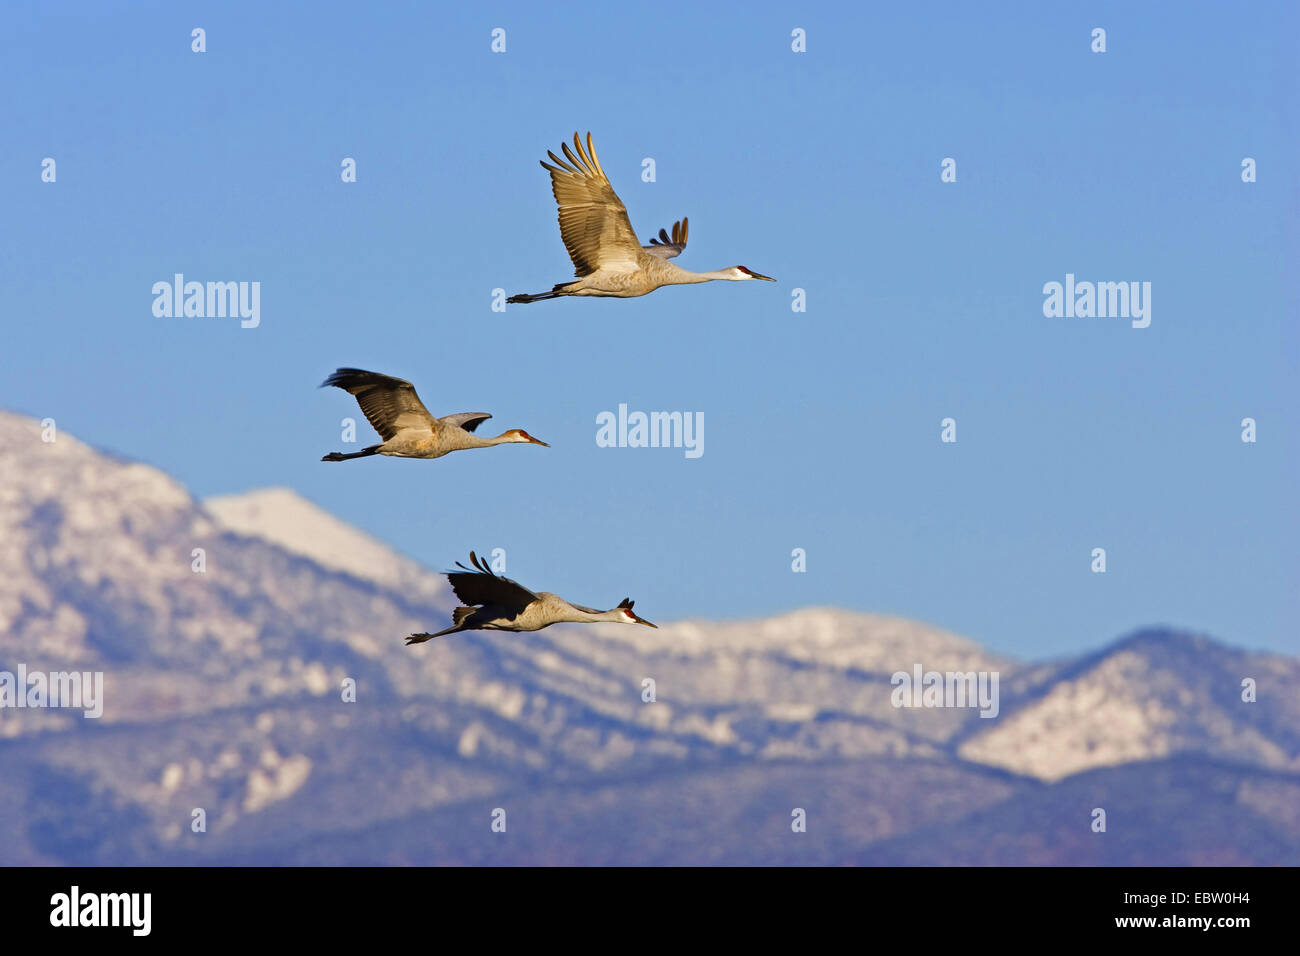 sandhill crane (Grus canadensis), sandhill crane flying in frint of snowcovered mountains, USA, New Mexico, Bosque del Apache Wildlife Refuge Stock Photo